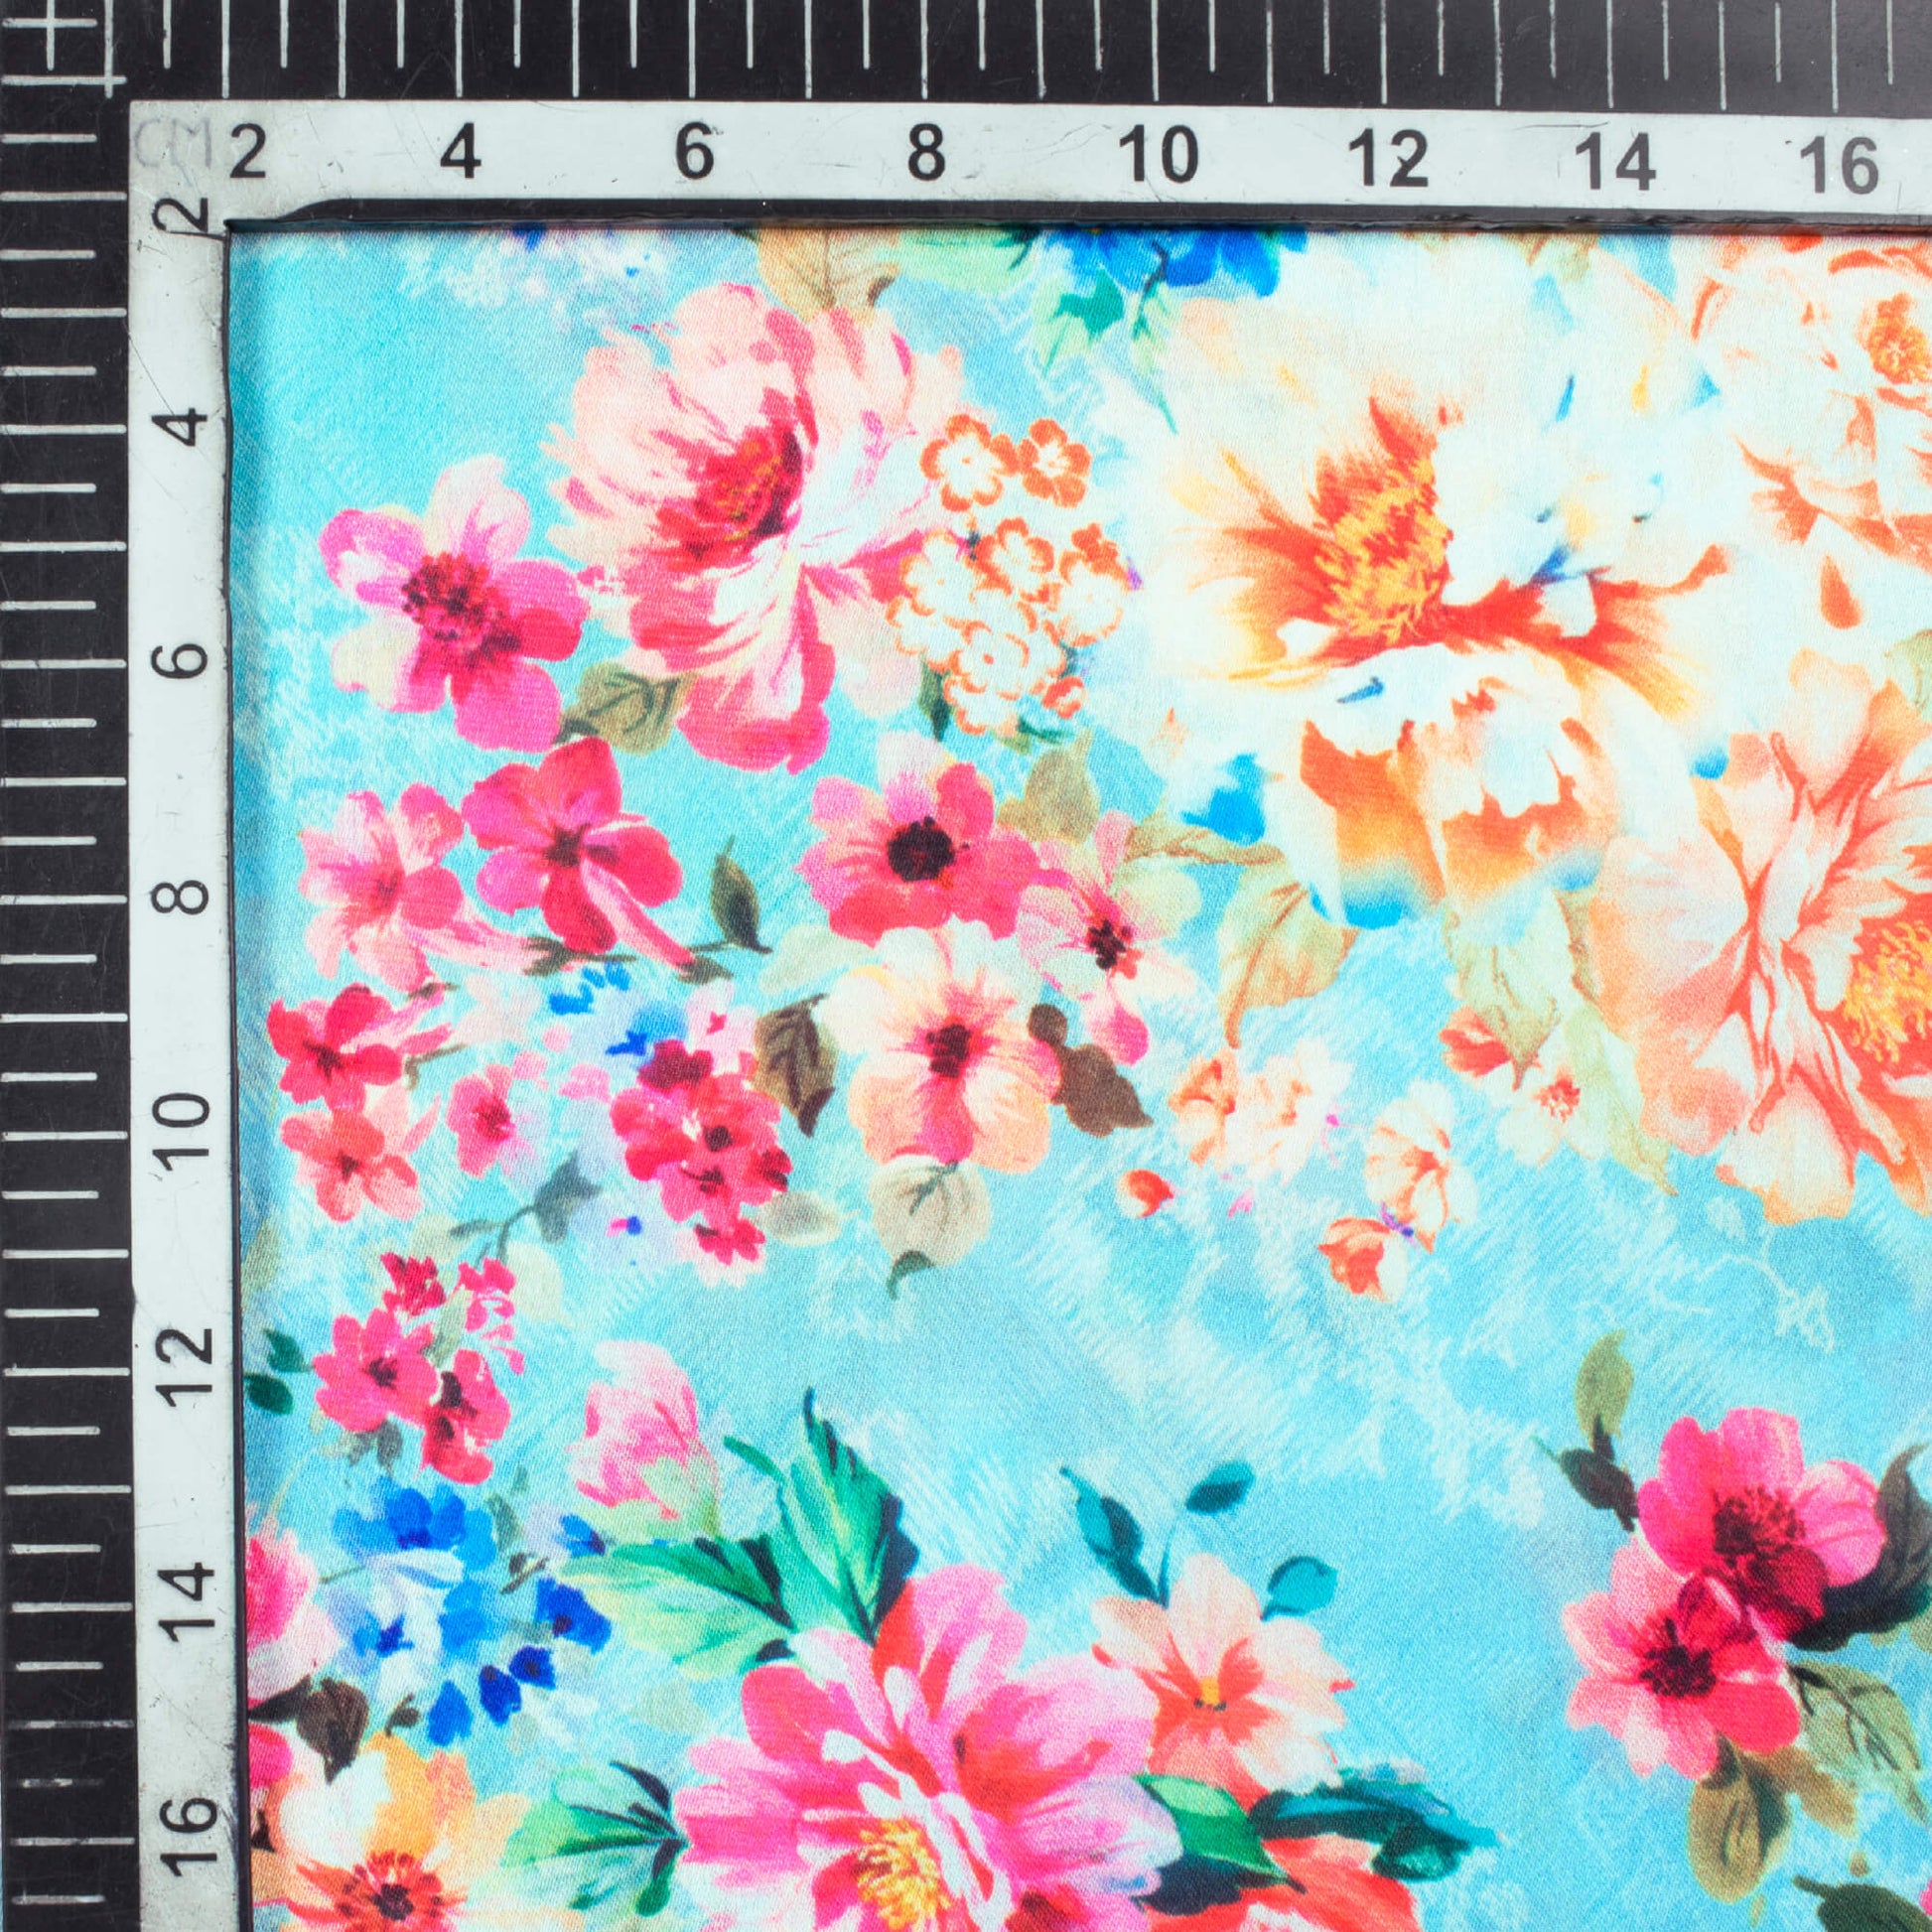 Sky Blue And Fuchsia Floral Pattern Digital Print Georgette Satin Fabric - Fabcurate